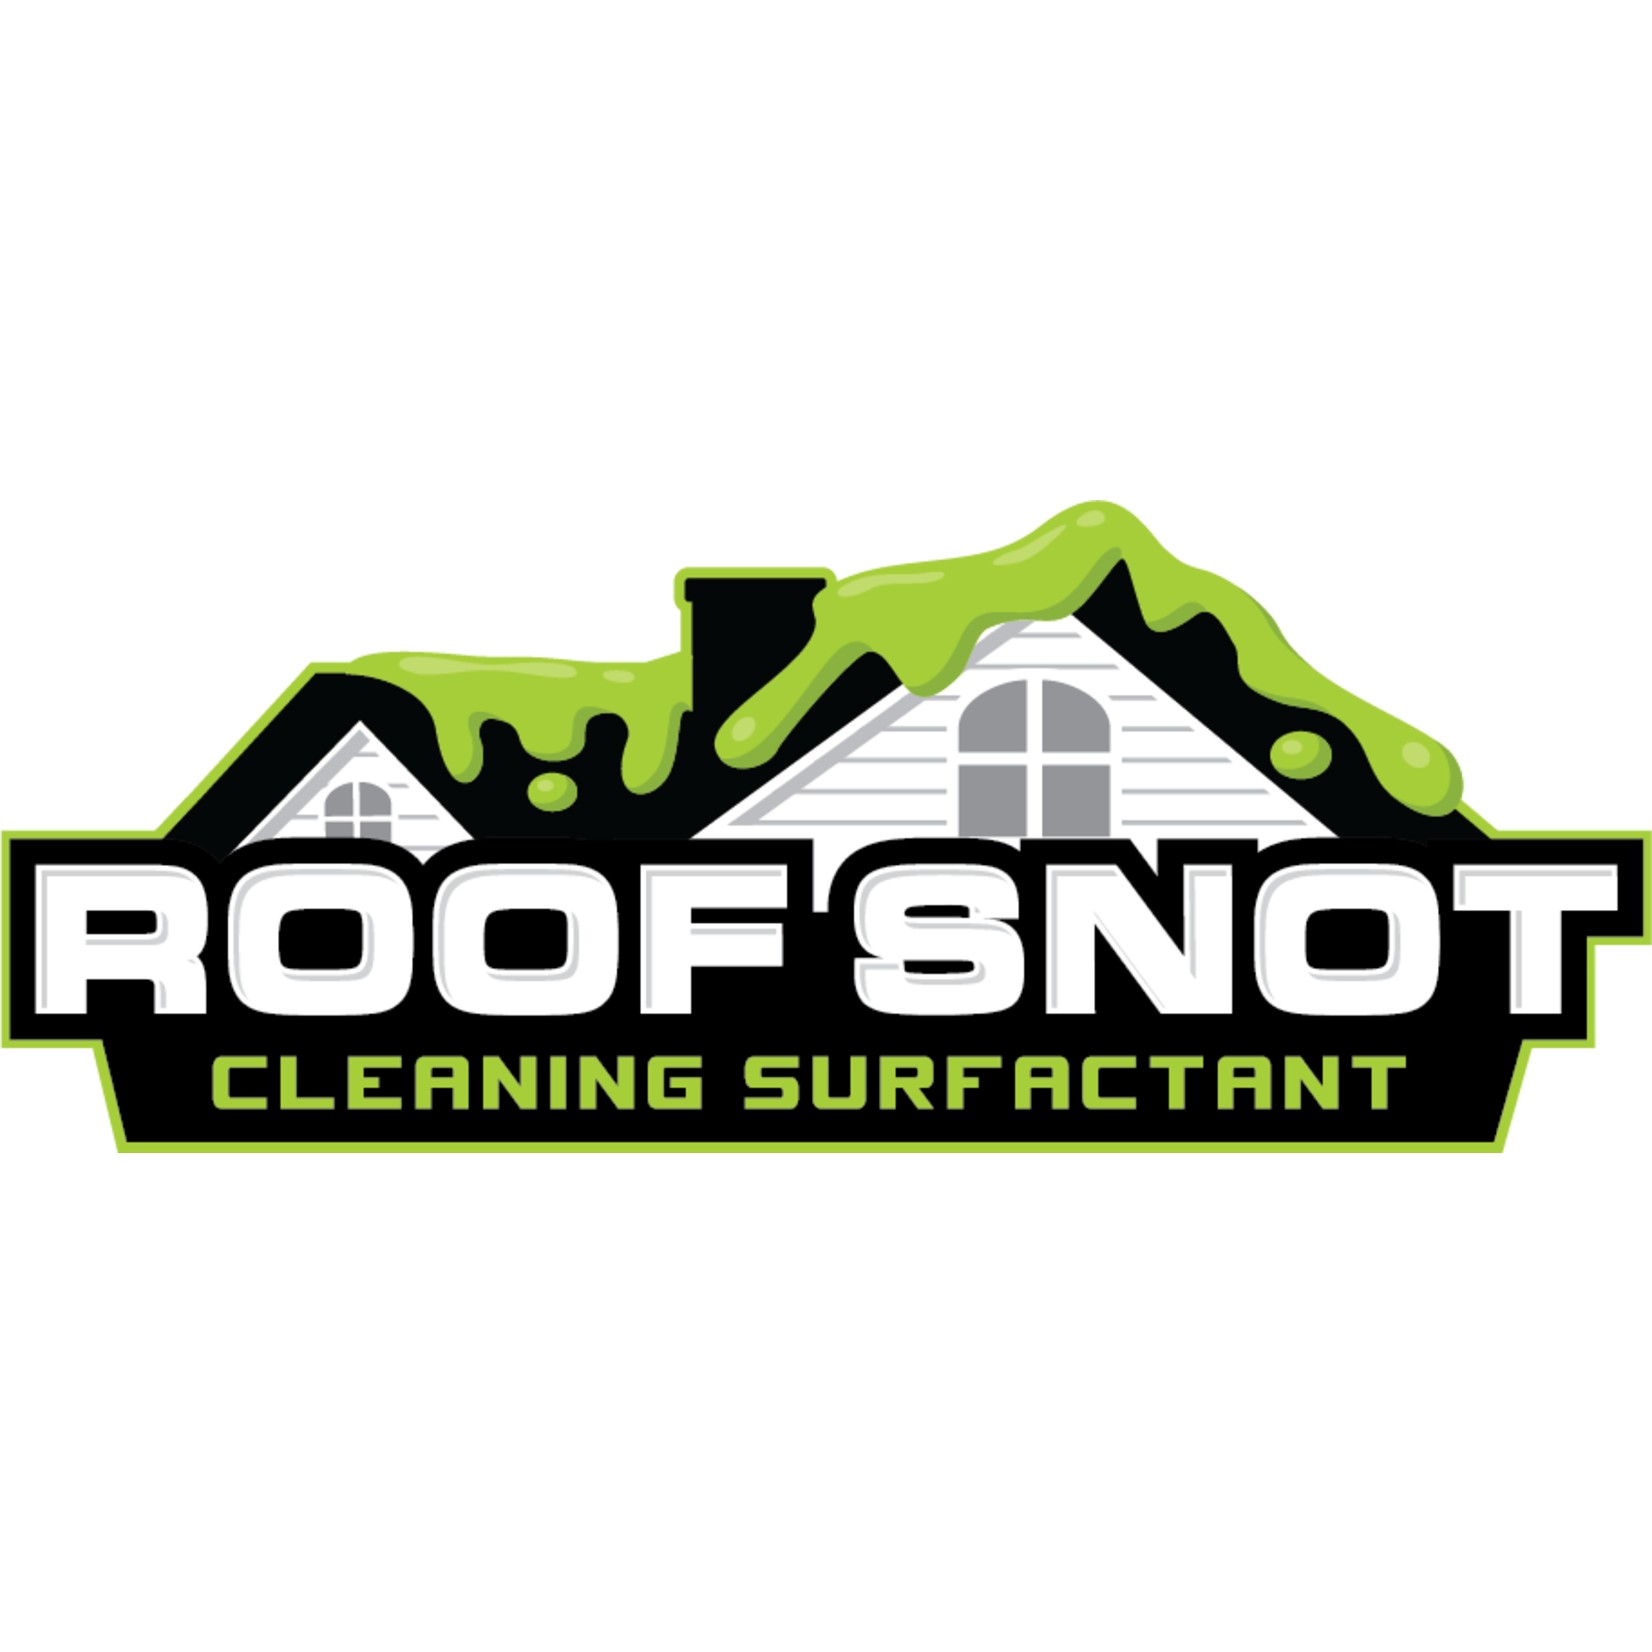 Roof Snot | Case